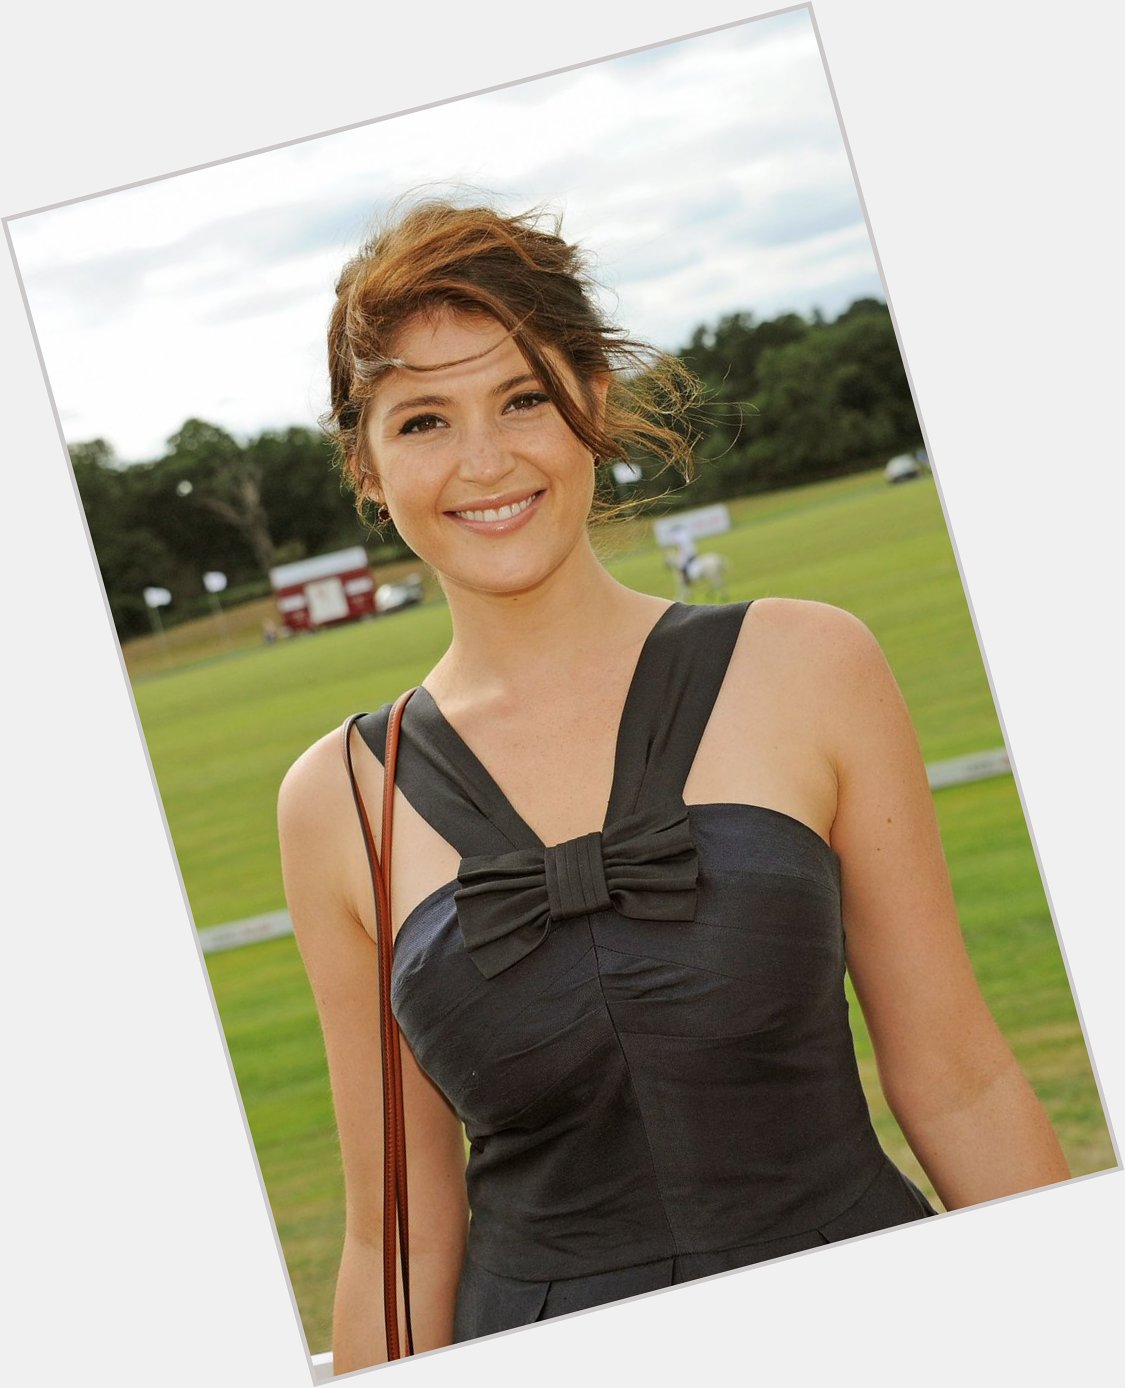 Happy Birthday wishes to Gemma Arterton who is 33 today. 